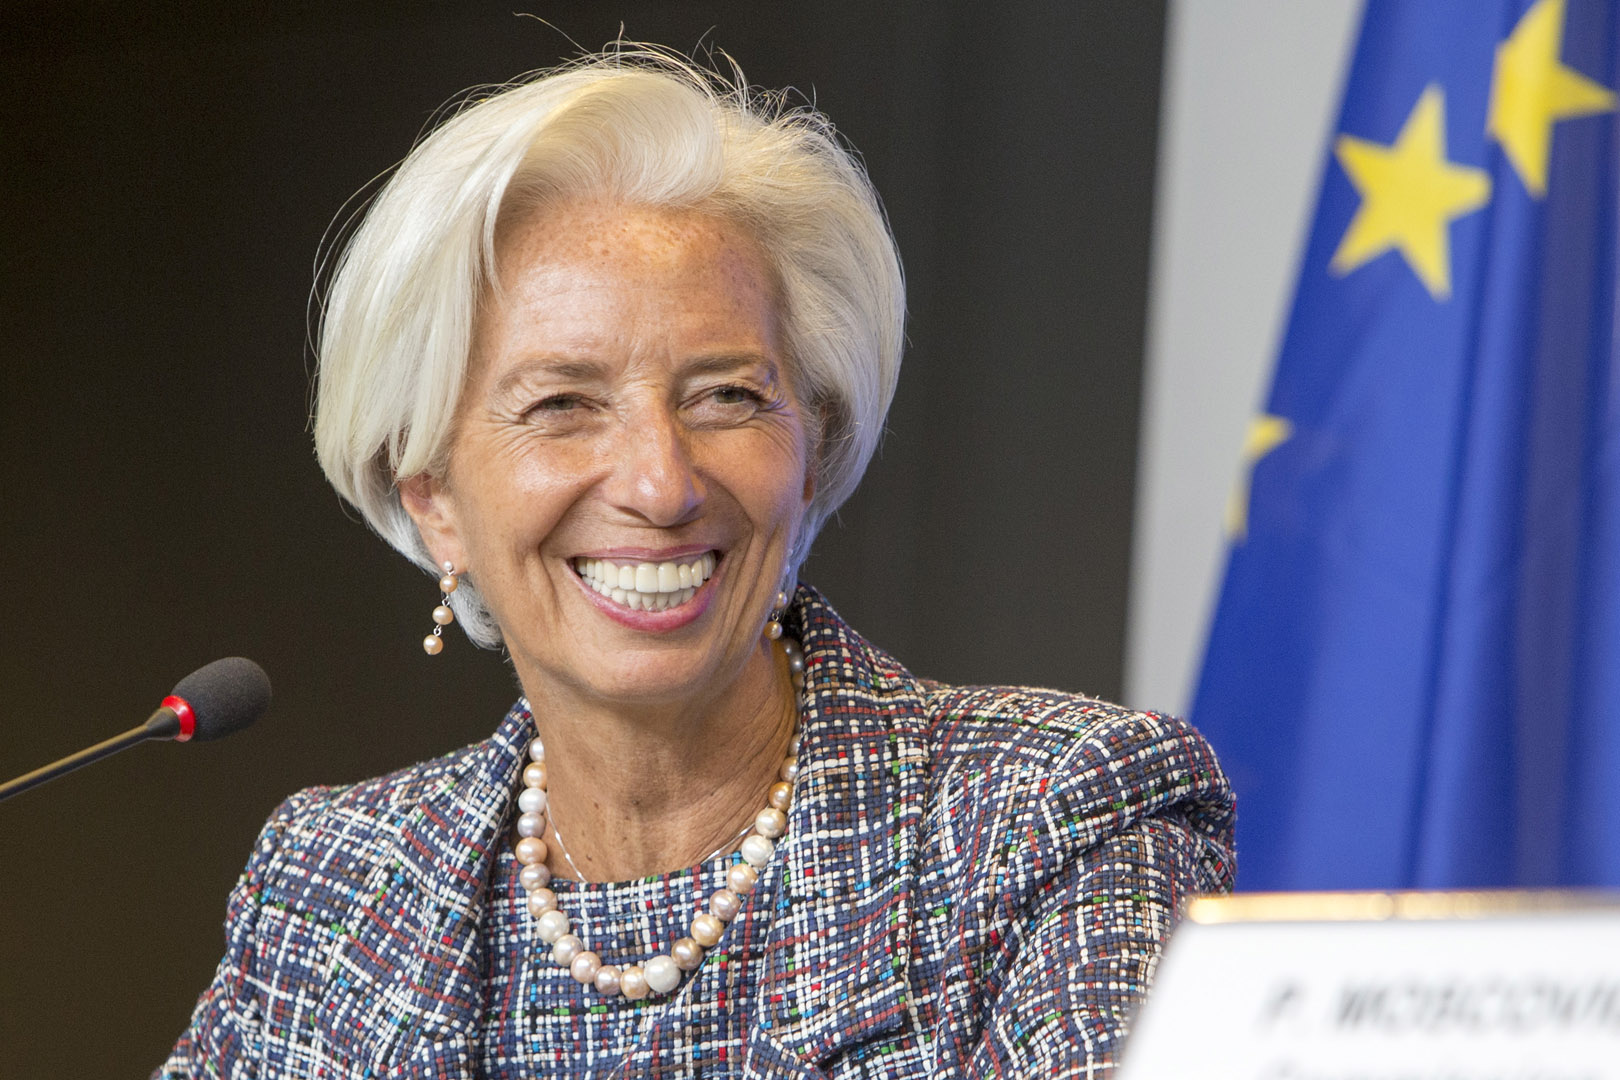 European Central Bank President Lagarde: Evaluating the Impact of Central Bank Digital Currency on European People and Economy